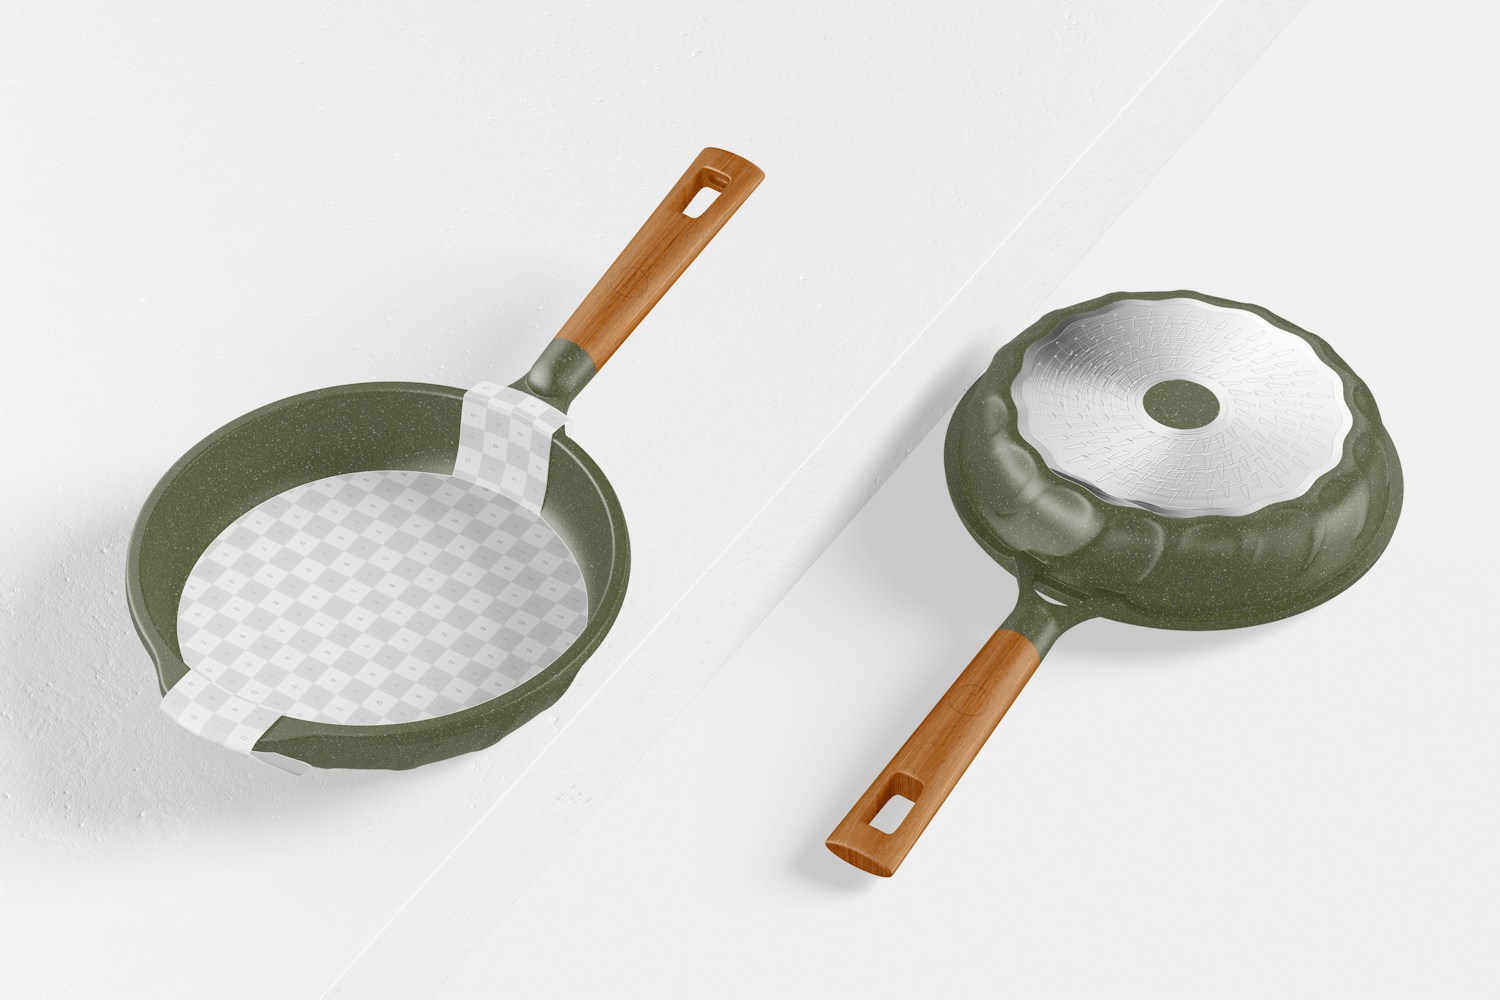 Nonstick Frying Pan Mockup, Front and Back